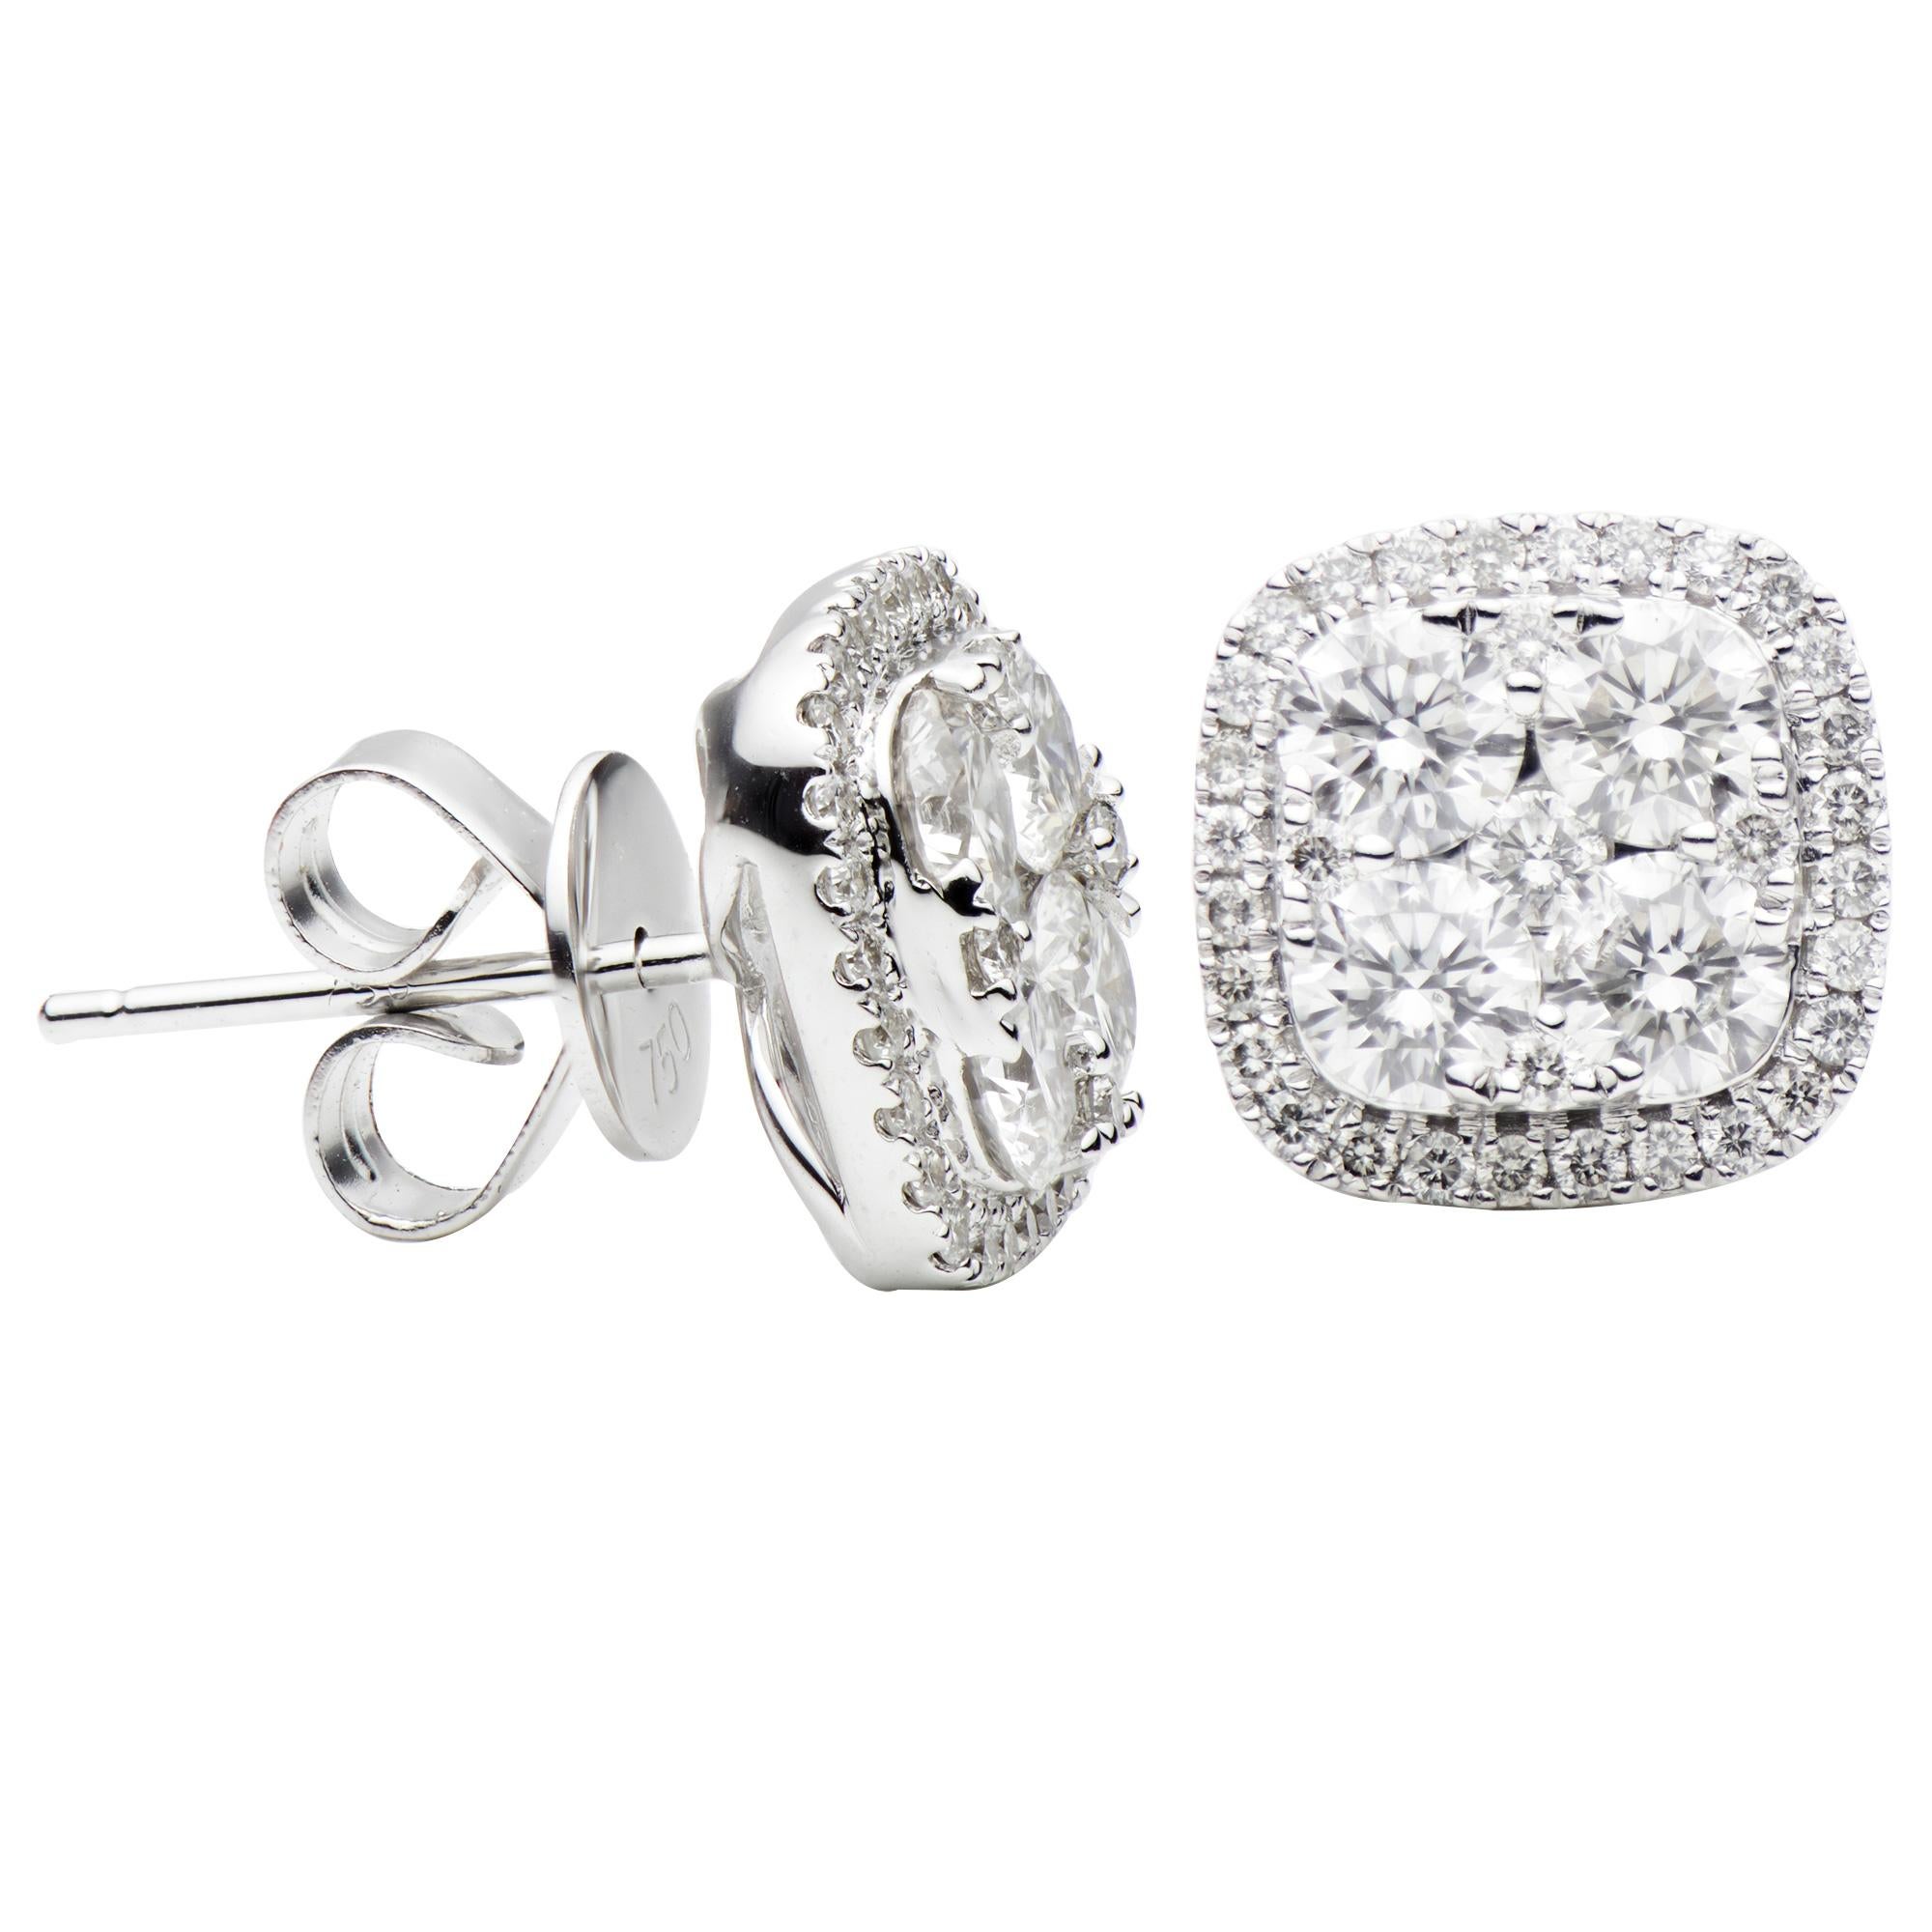 These stunning diamond earrings are made of 8D, 1.49ct and 66D, 0.37ct round SI, H color diamonds; and create a beautiful 10.5 mm square-shaped earring with a halo. There is a total of 1.86 carat diamonds with 2.7 grams of 14 karat white gold. These